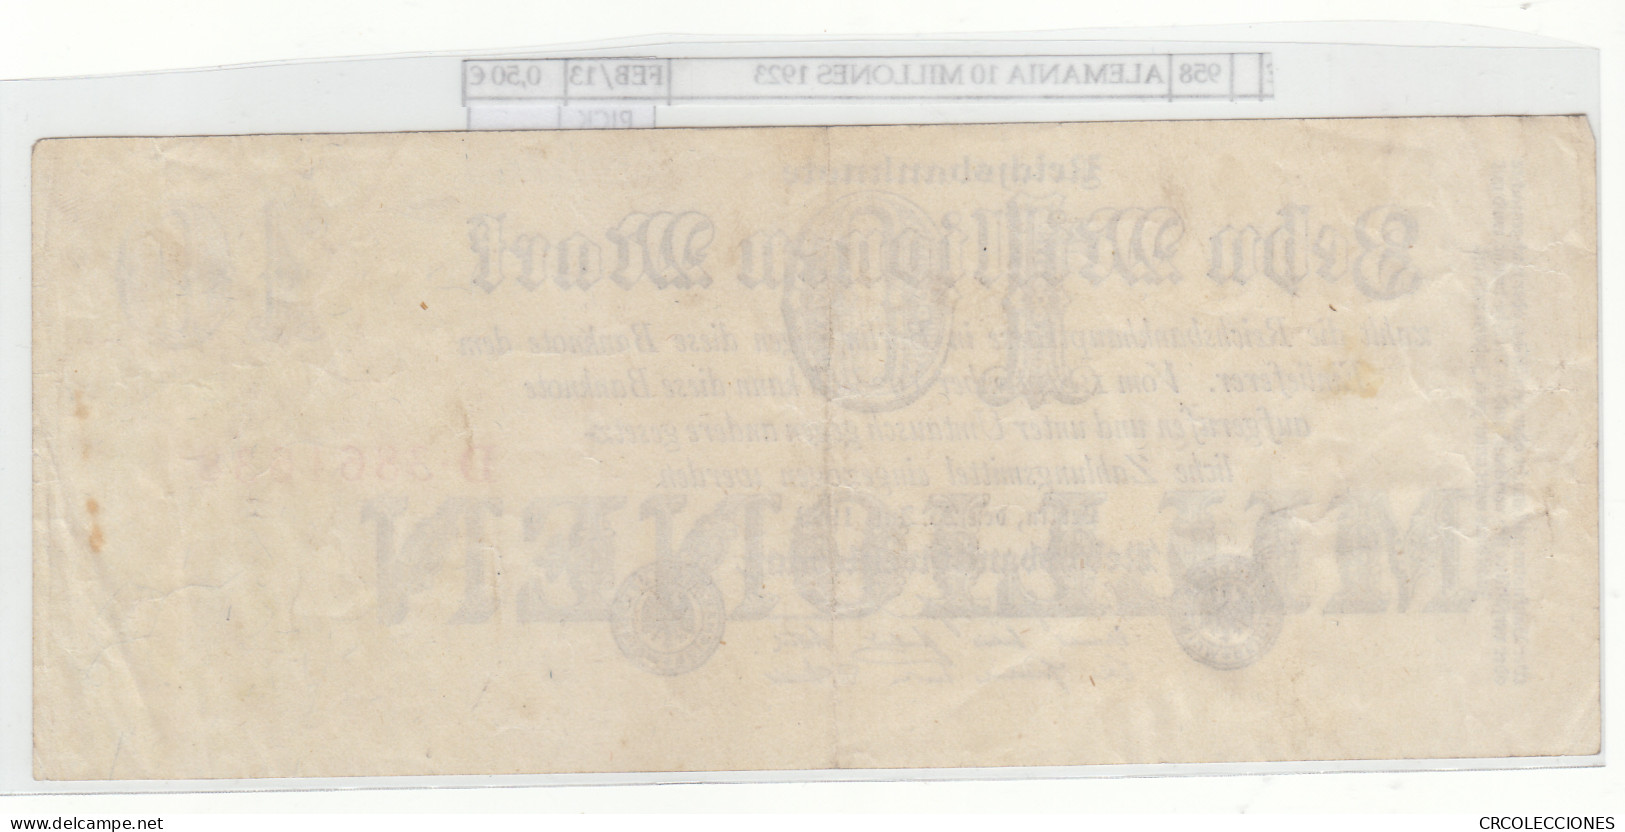 BILLETE ALEMANIA 10 MILLONES 1923 P-96  - Other - Europe